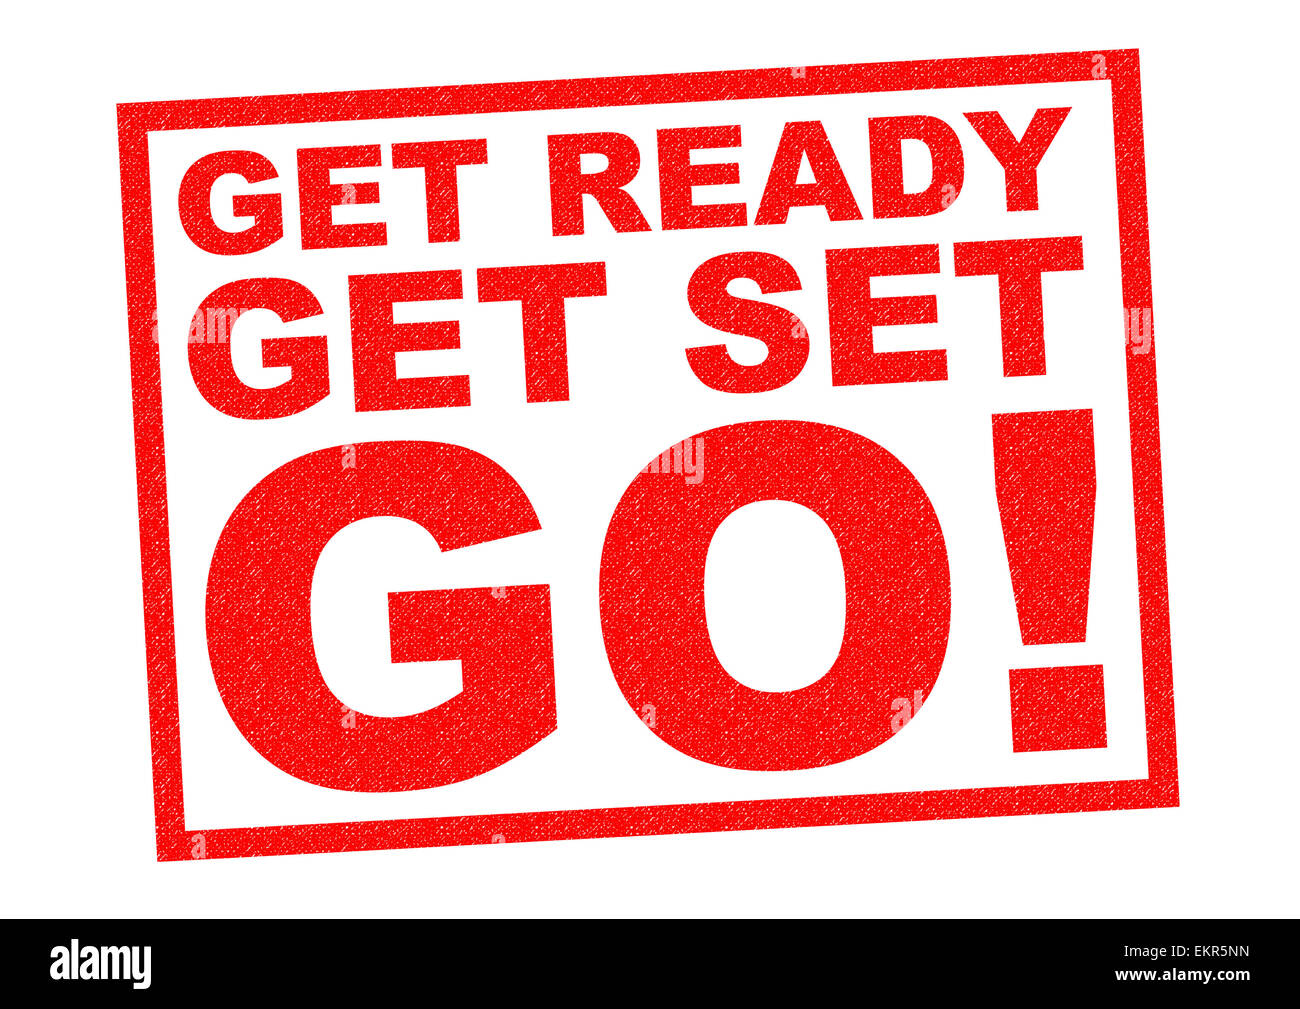 GET READY, GET SET, GO! red Rubber Stamp over a white background. Stock Photo